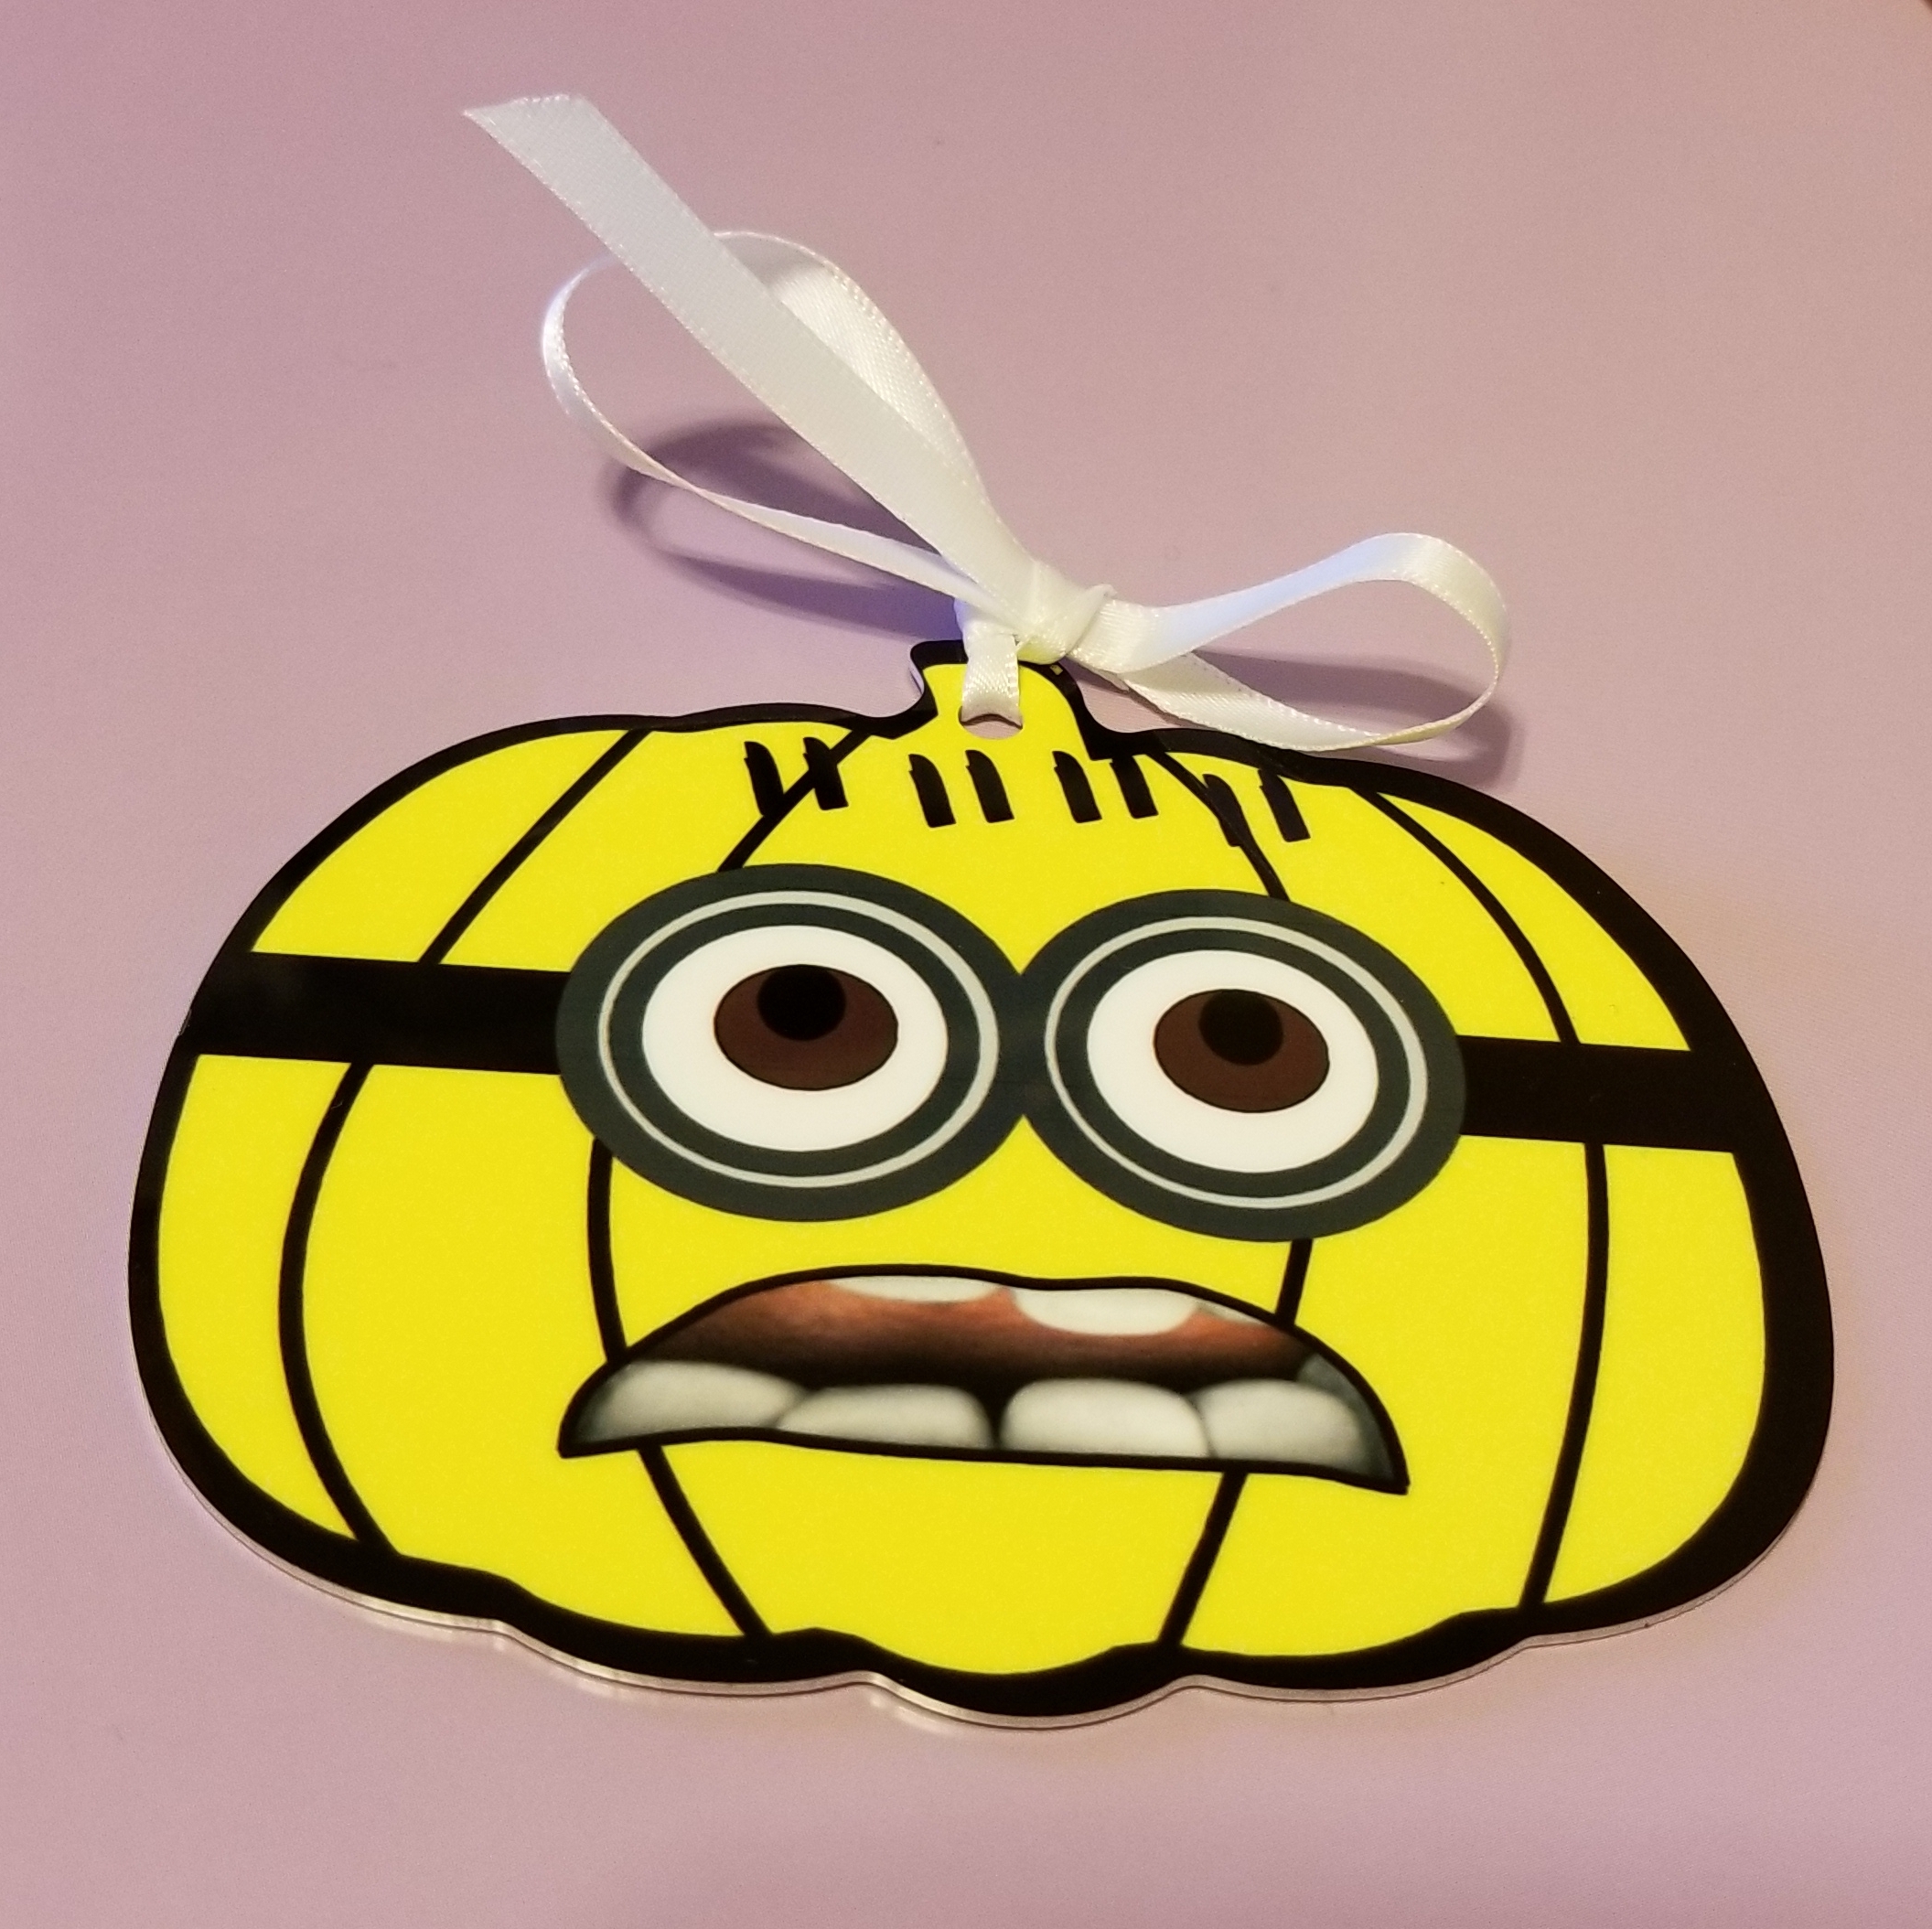 Pumpkin Ornament - Halloween Contest made with sublimation printing